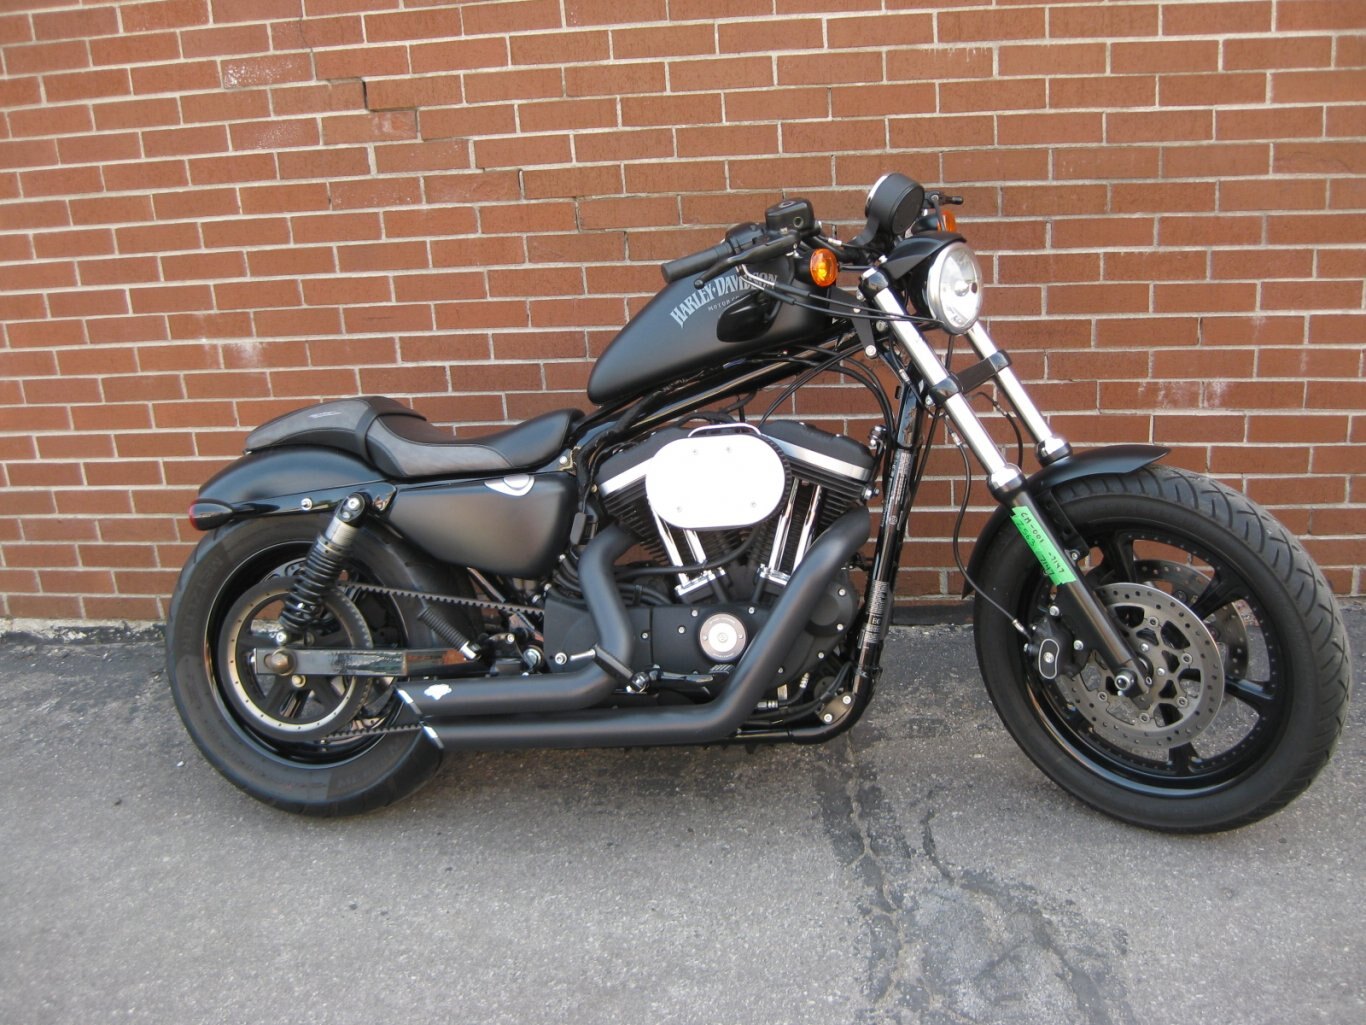 Customized 2020 Harley-Davidson XL883N Iron - SOLD AND CONGRATS TO TO THE “MYSTERY RIDER”!! WELCOME TO THE “DARK SIDE” ON THIS “DARK HORSE” MUSCLE HARLEY DAVIDSON   IRON  - TWO WHEEL FREEDOM MACHINE - WITH THANKS FROM GARY & TEAM CYCLE WORLD!!!!